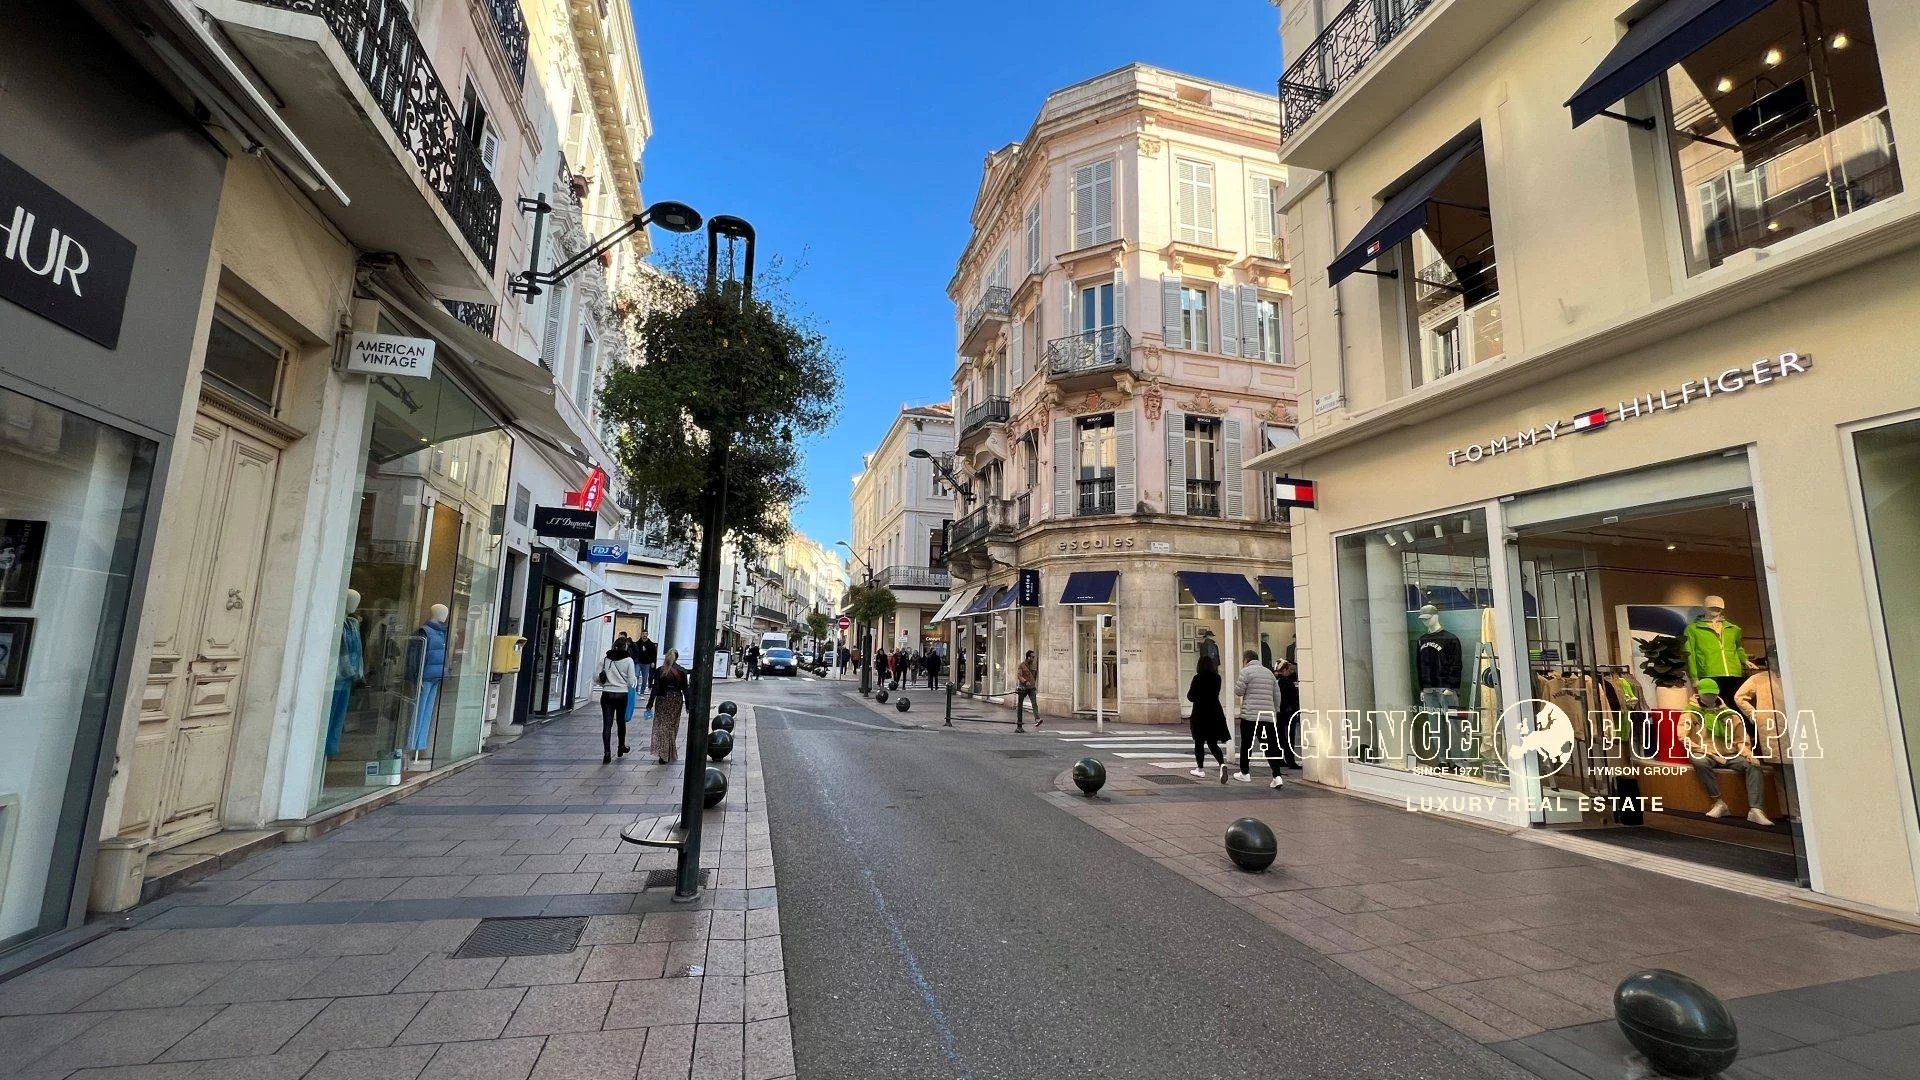 Vente Local Commercial 80m² à Cannes (06400) - Agence Europa